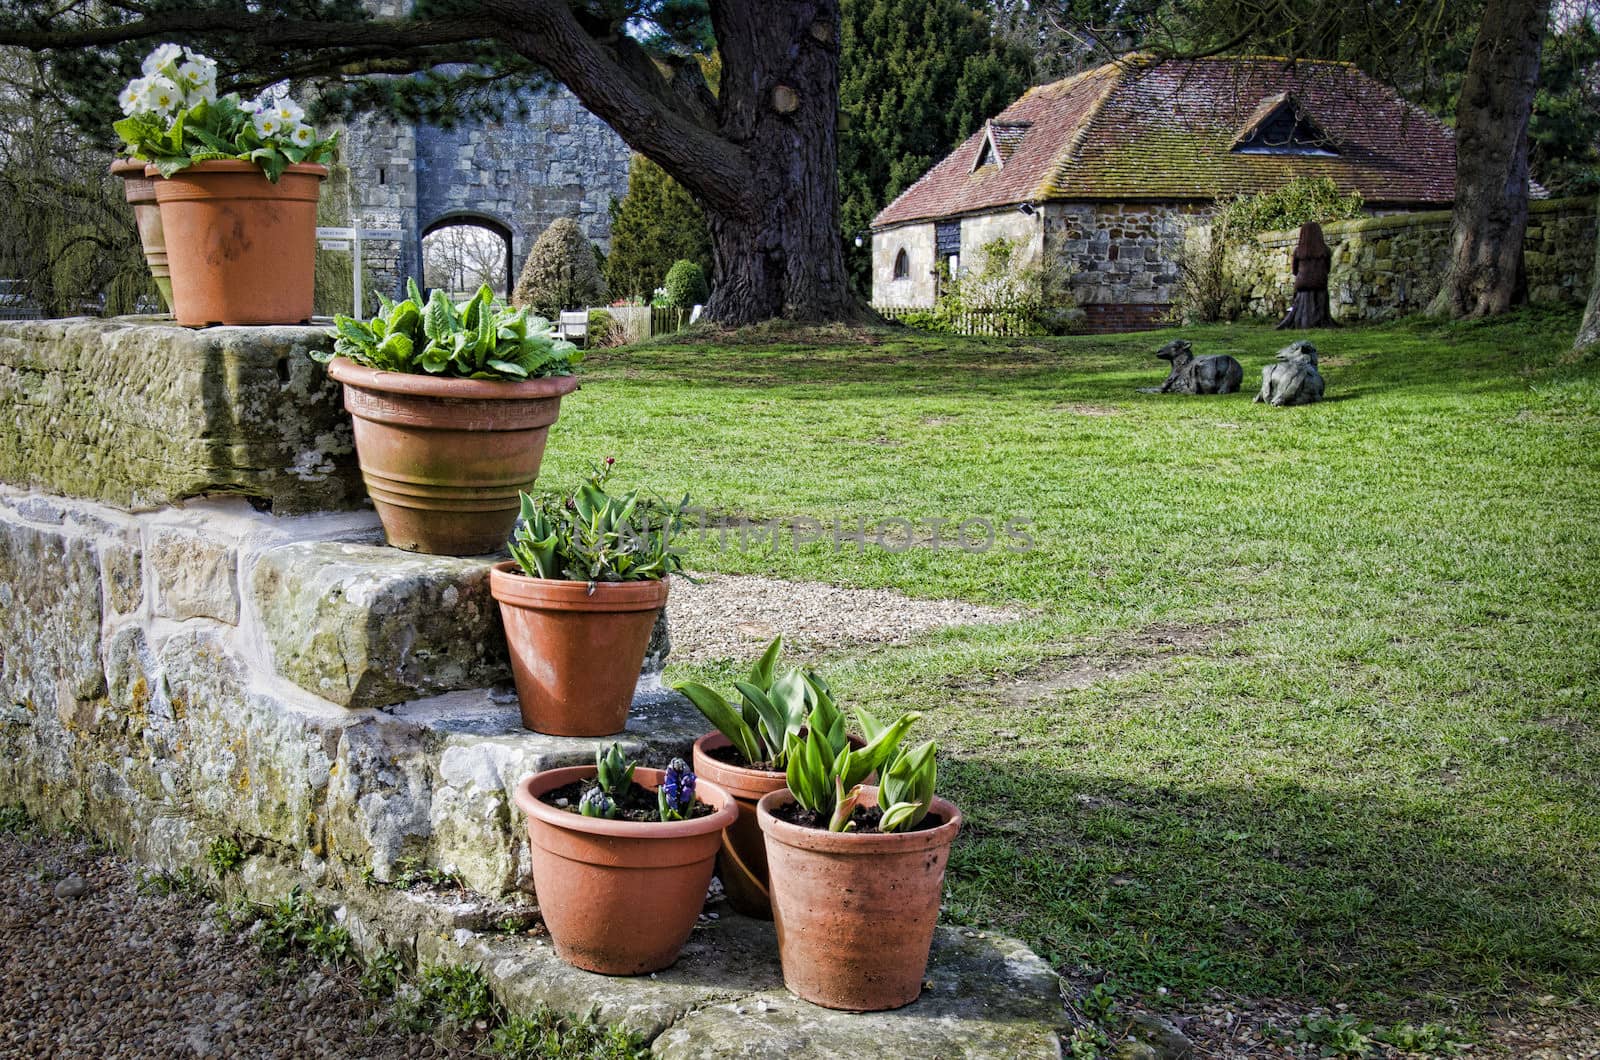 Flower pots in the grounds of Michelham Priory